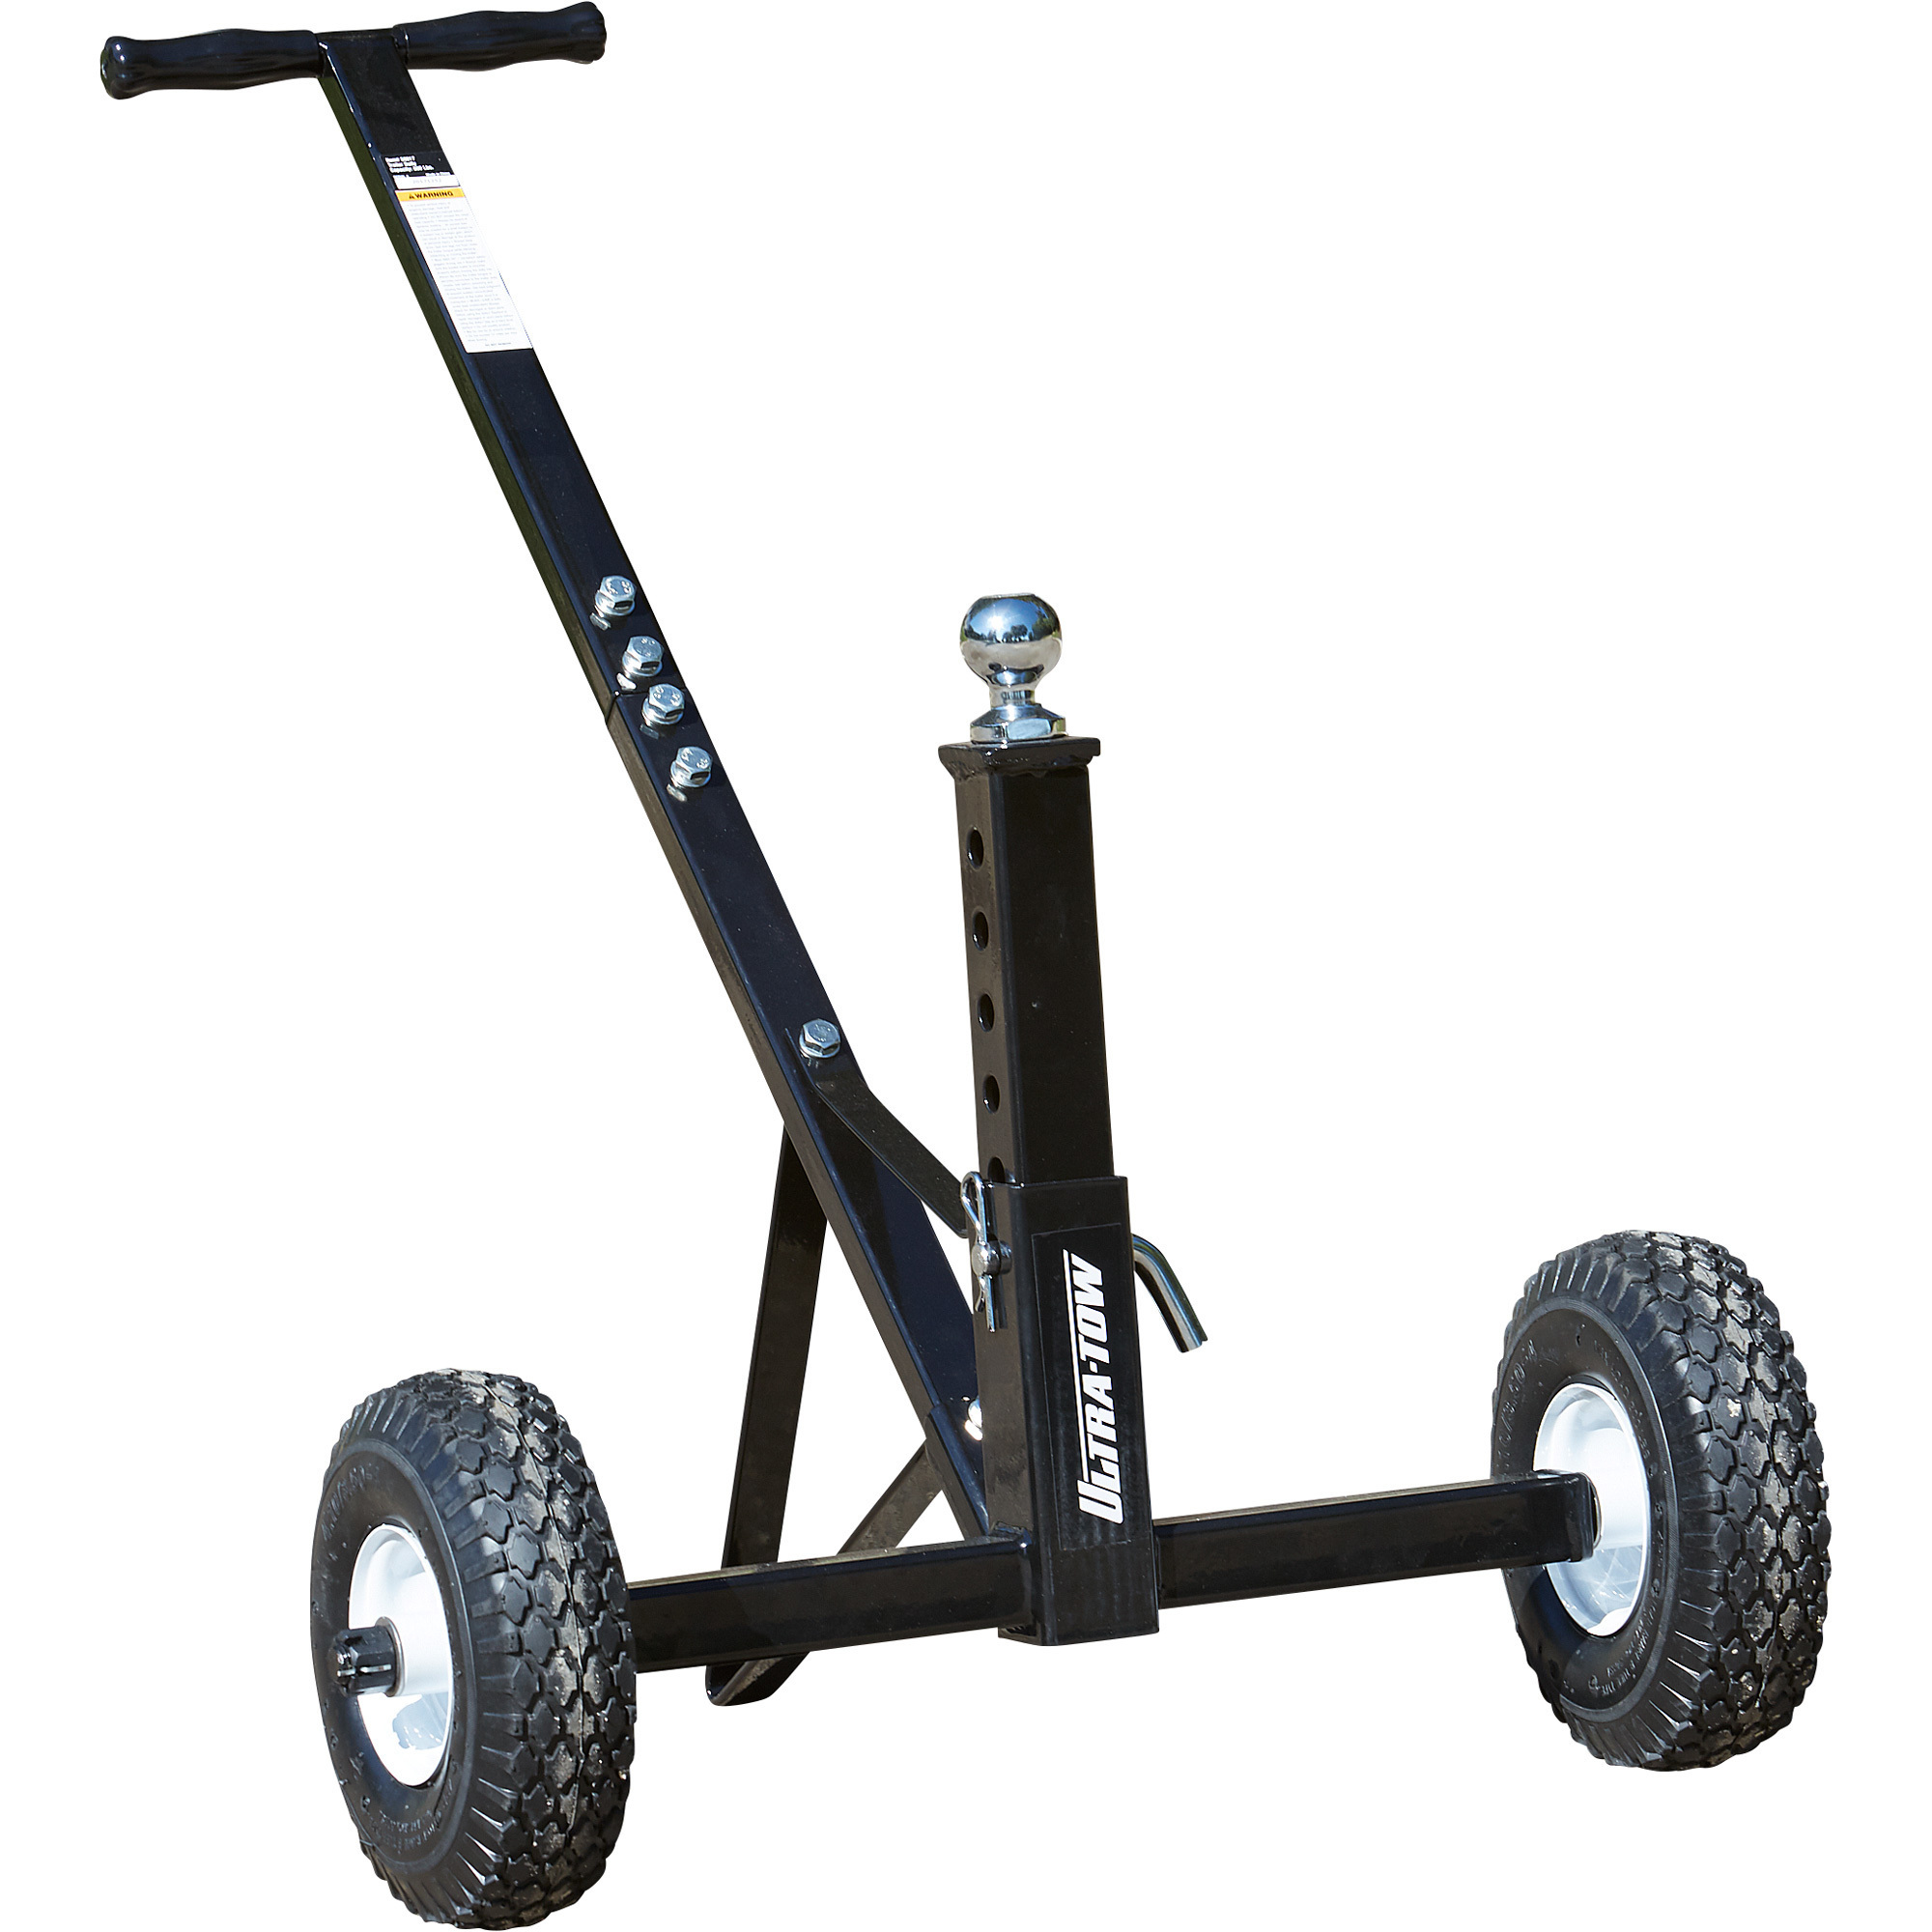 Ultra-Tow Adjustable Trailer Dolly â 600-Lb. Capacity